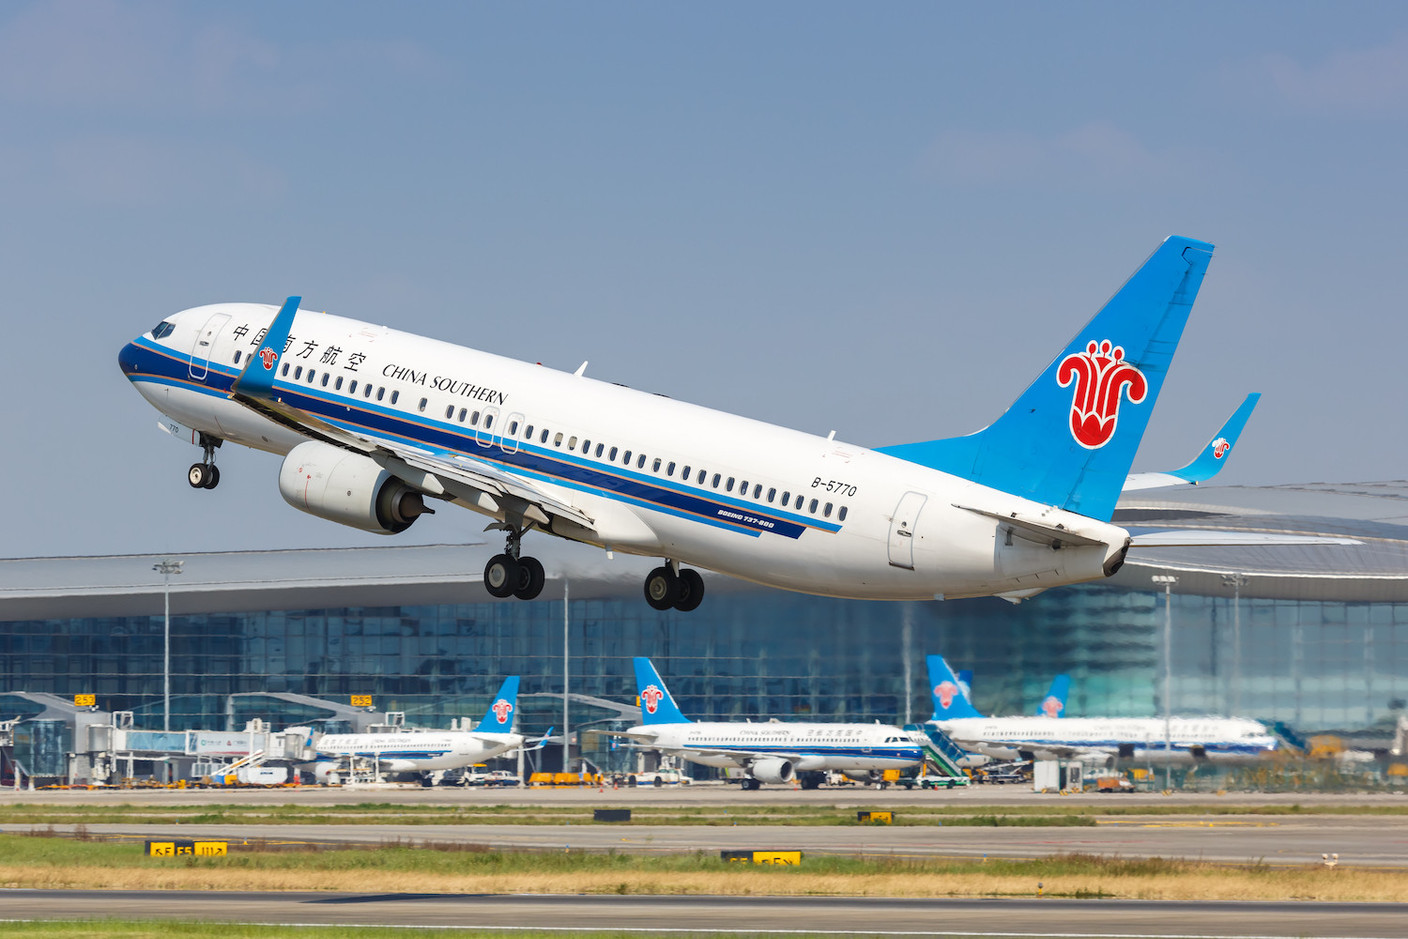 A Boeing 737-800 operated by China Southern Airlines at Guangzhou airport. Photo: Shutterstock